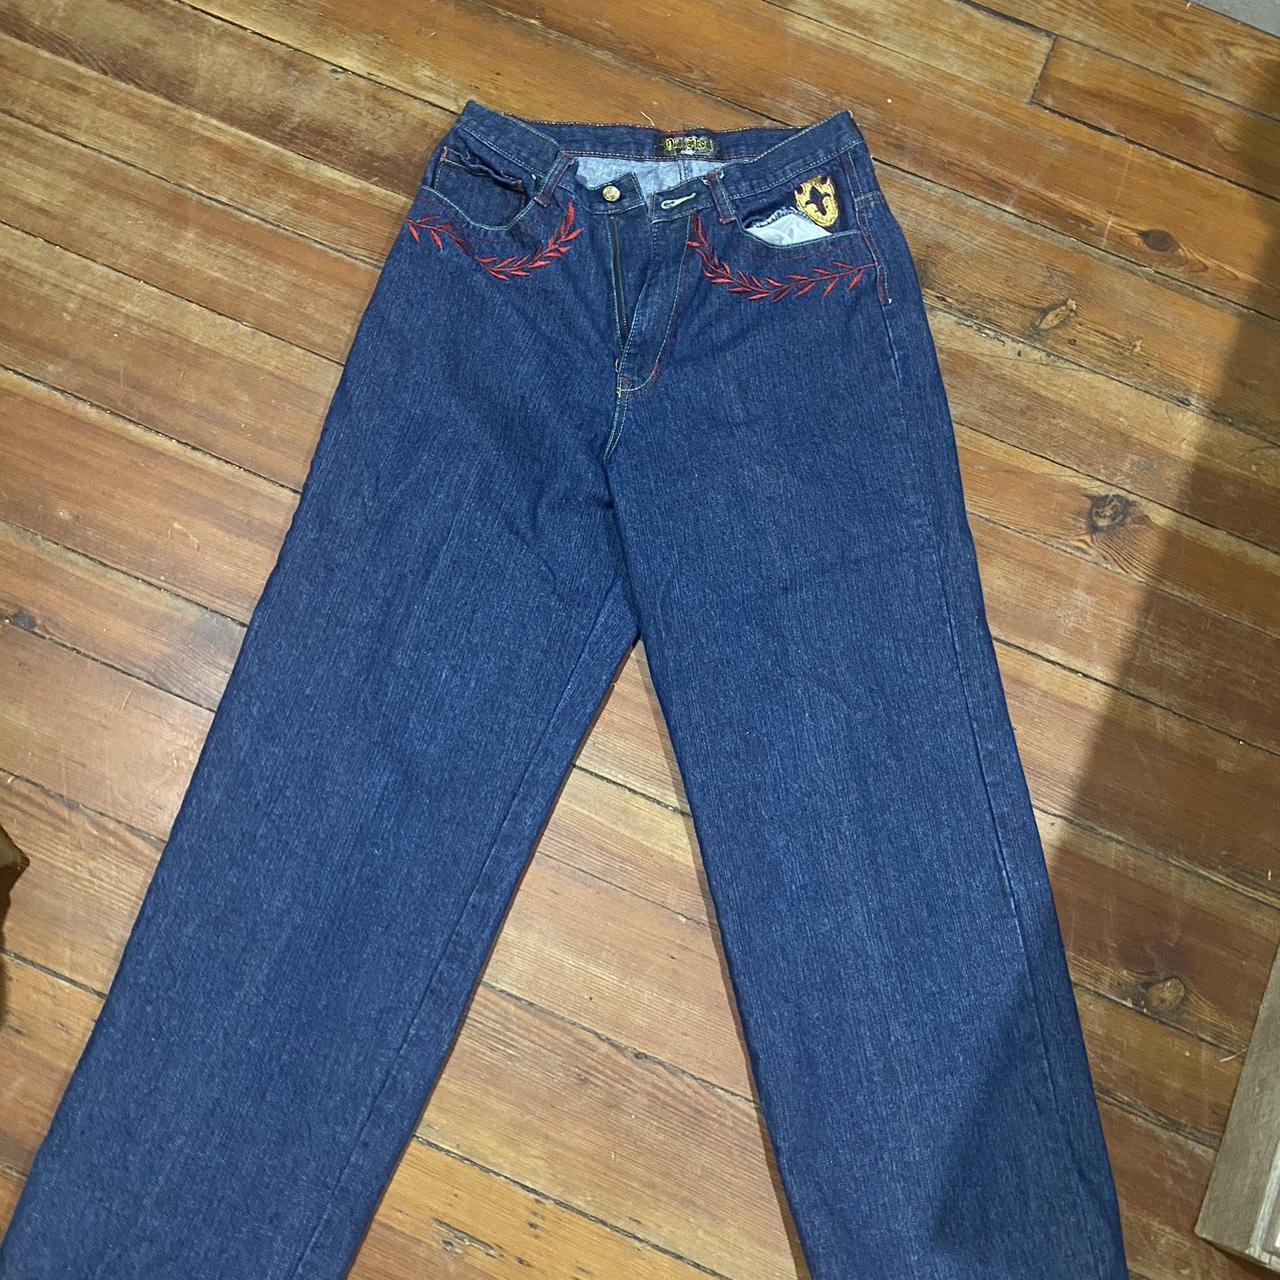 Old Skool jeans with insane graphics on front and... - Depop